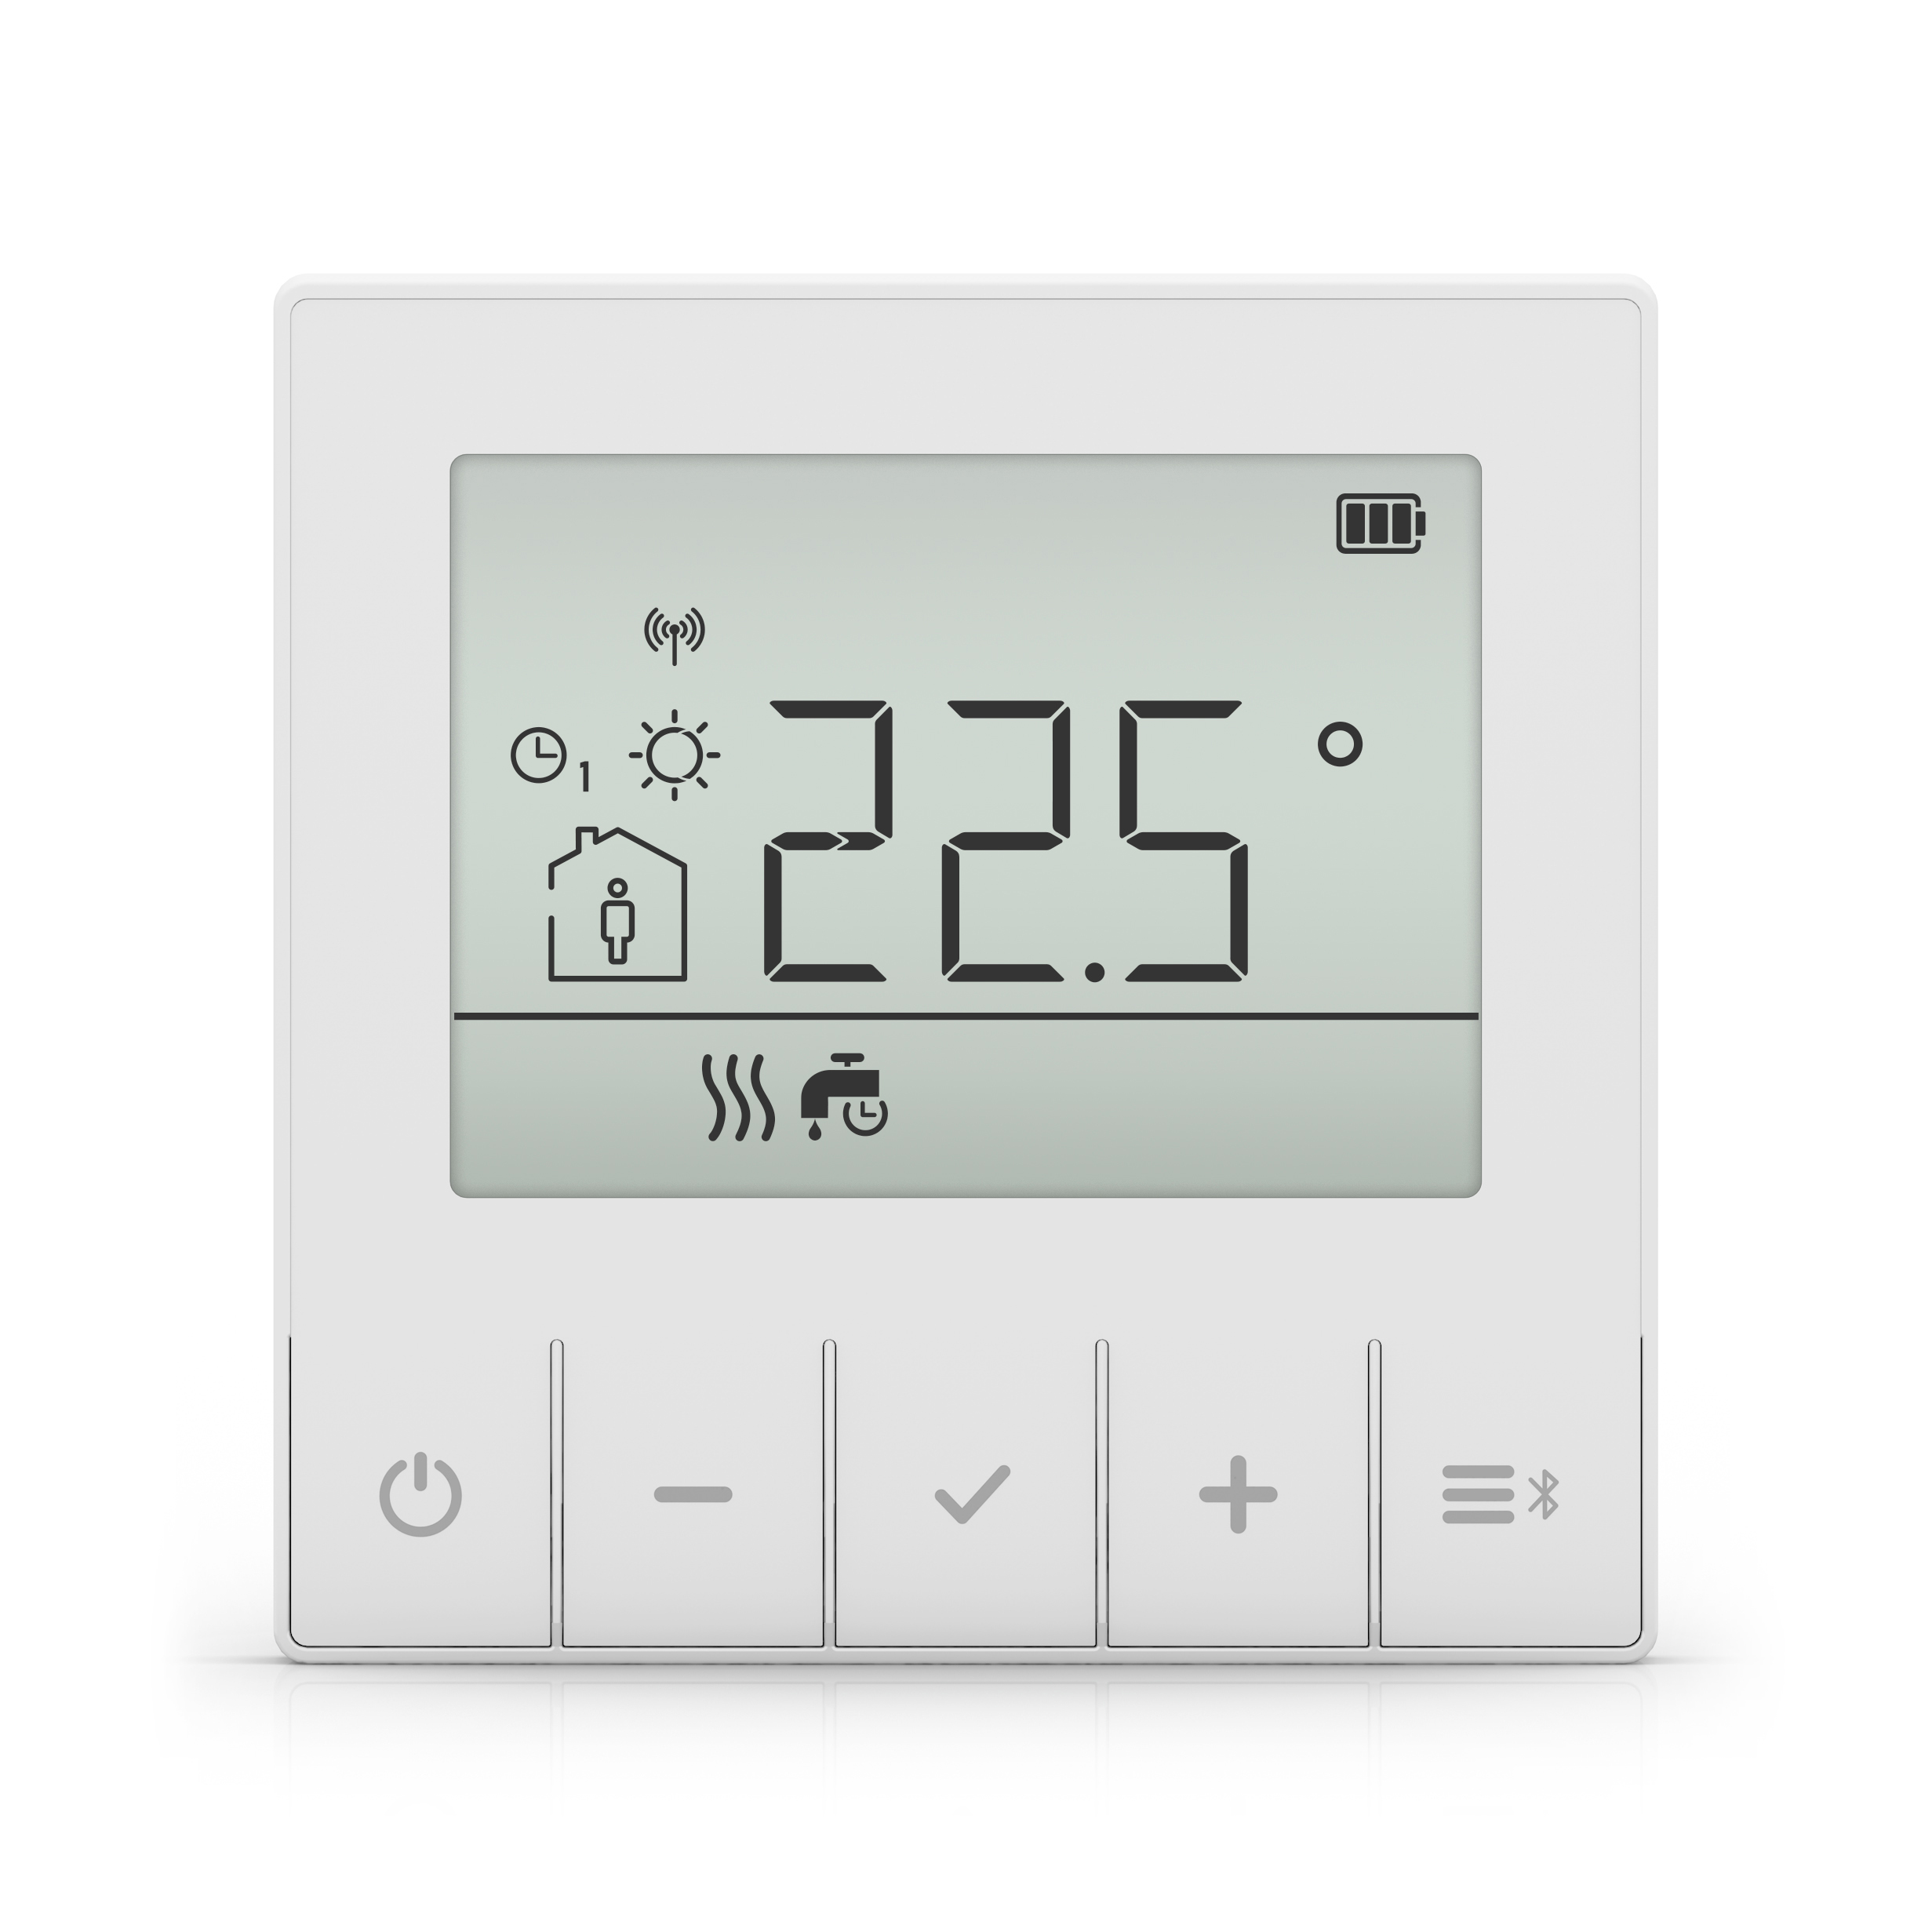 Meitronic room unit for weather-compensated control